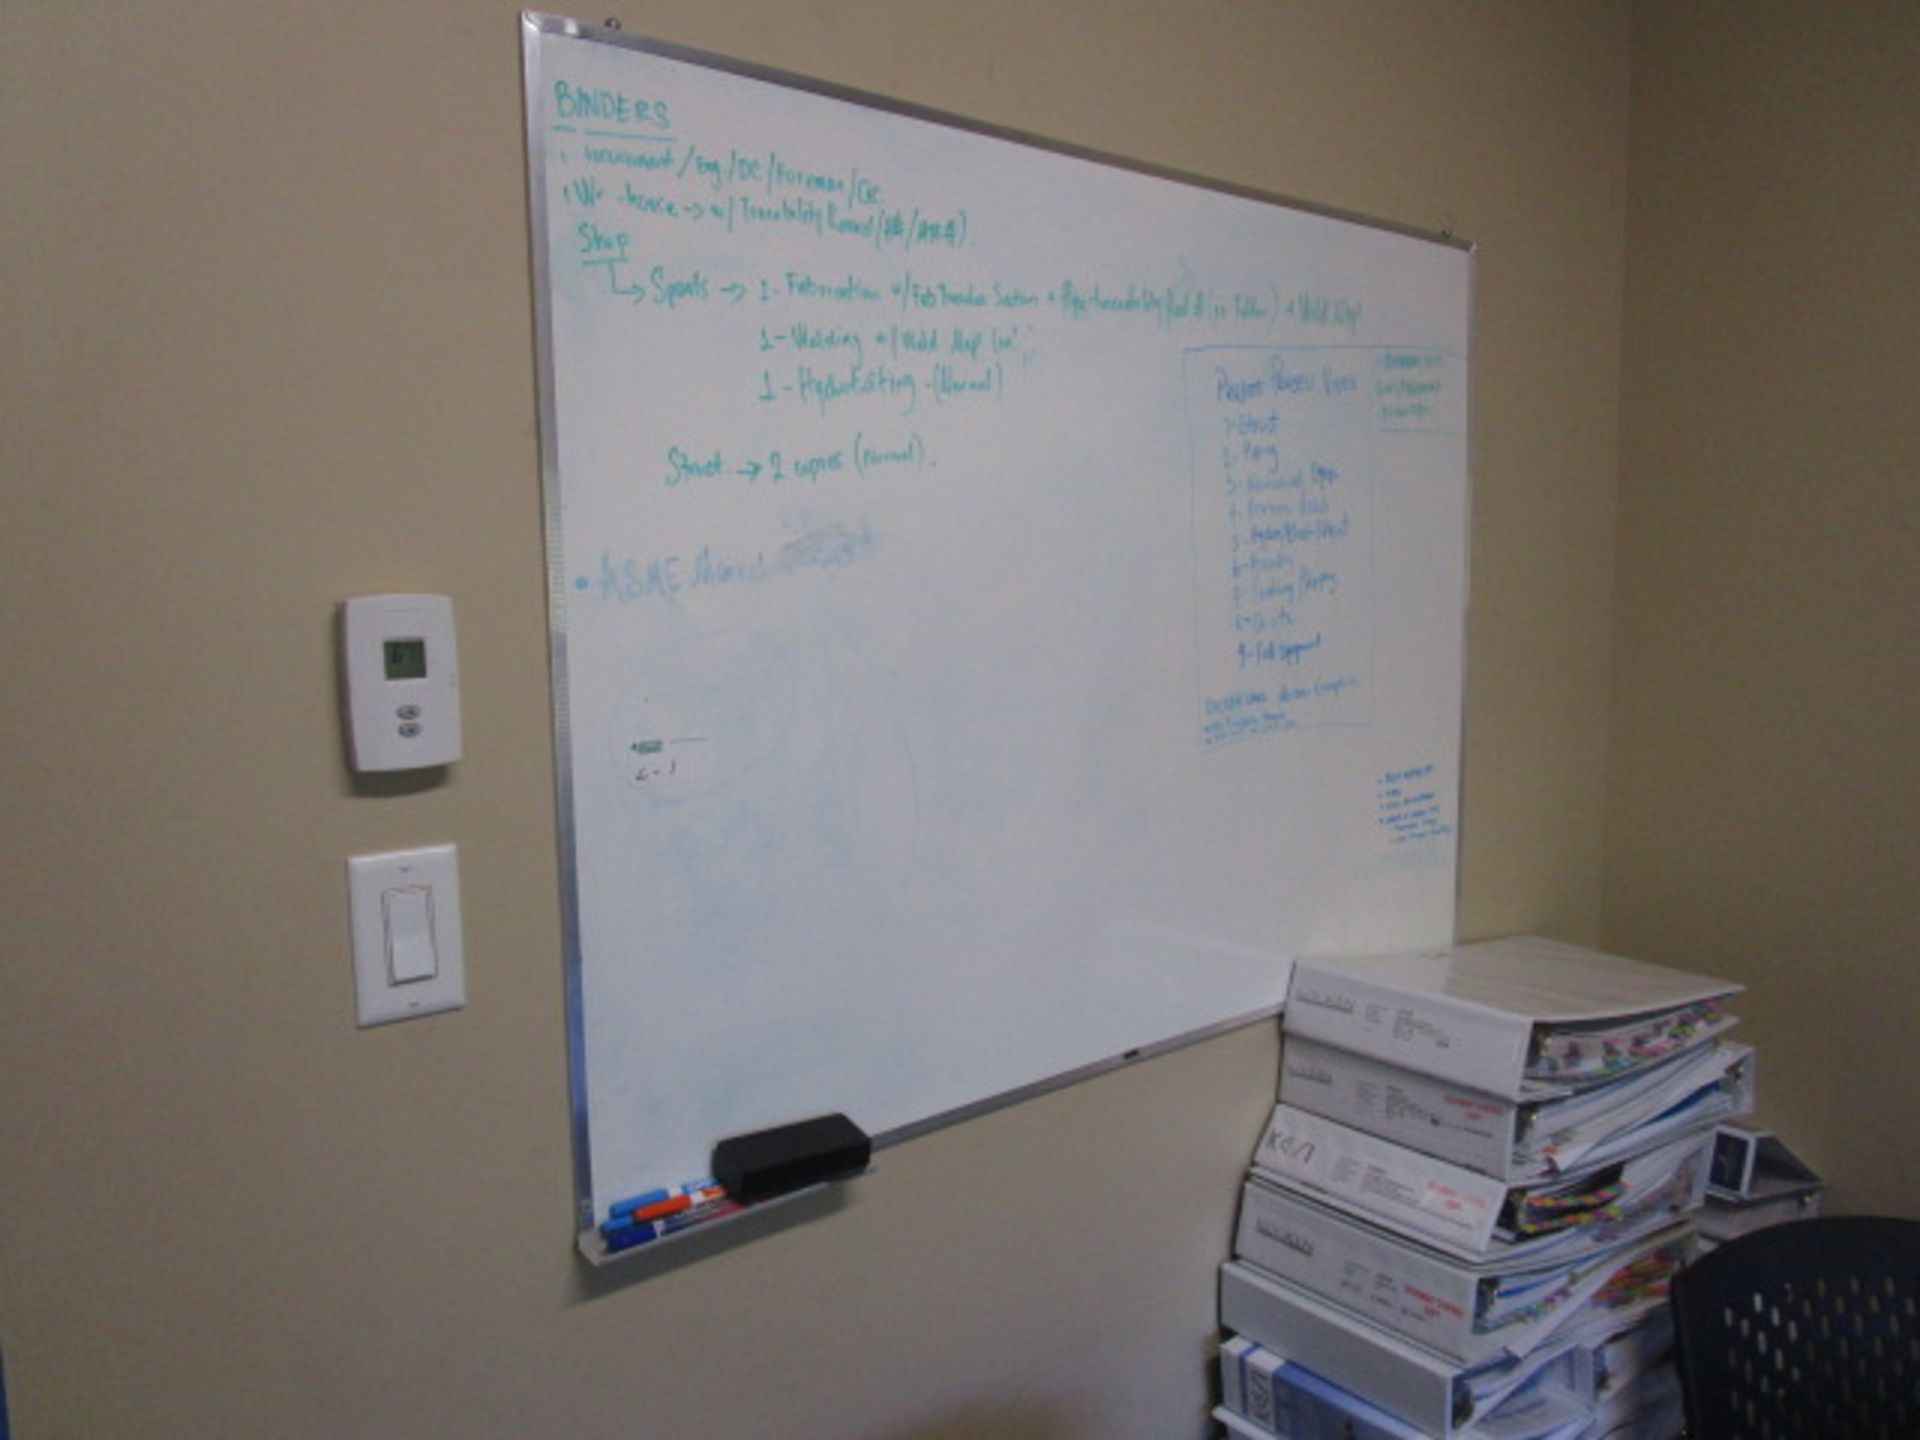 Complete Office Contents - includes Desk with Overshelf, 3 Chairs, 4 Door lateral filing cabinets, - Image 4 of 5